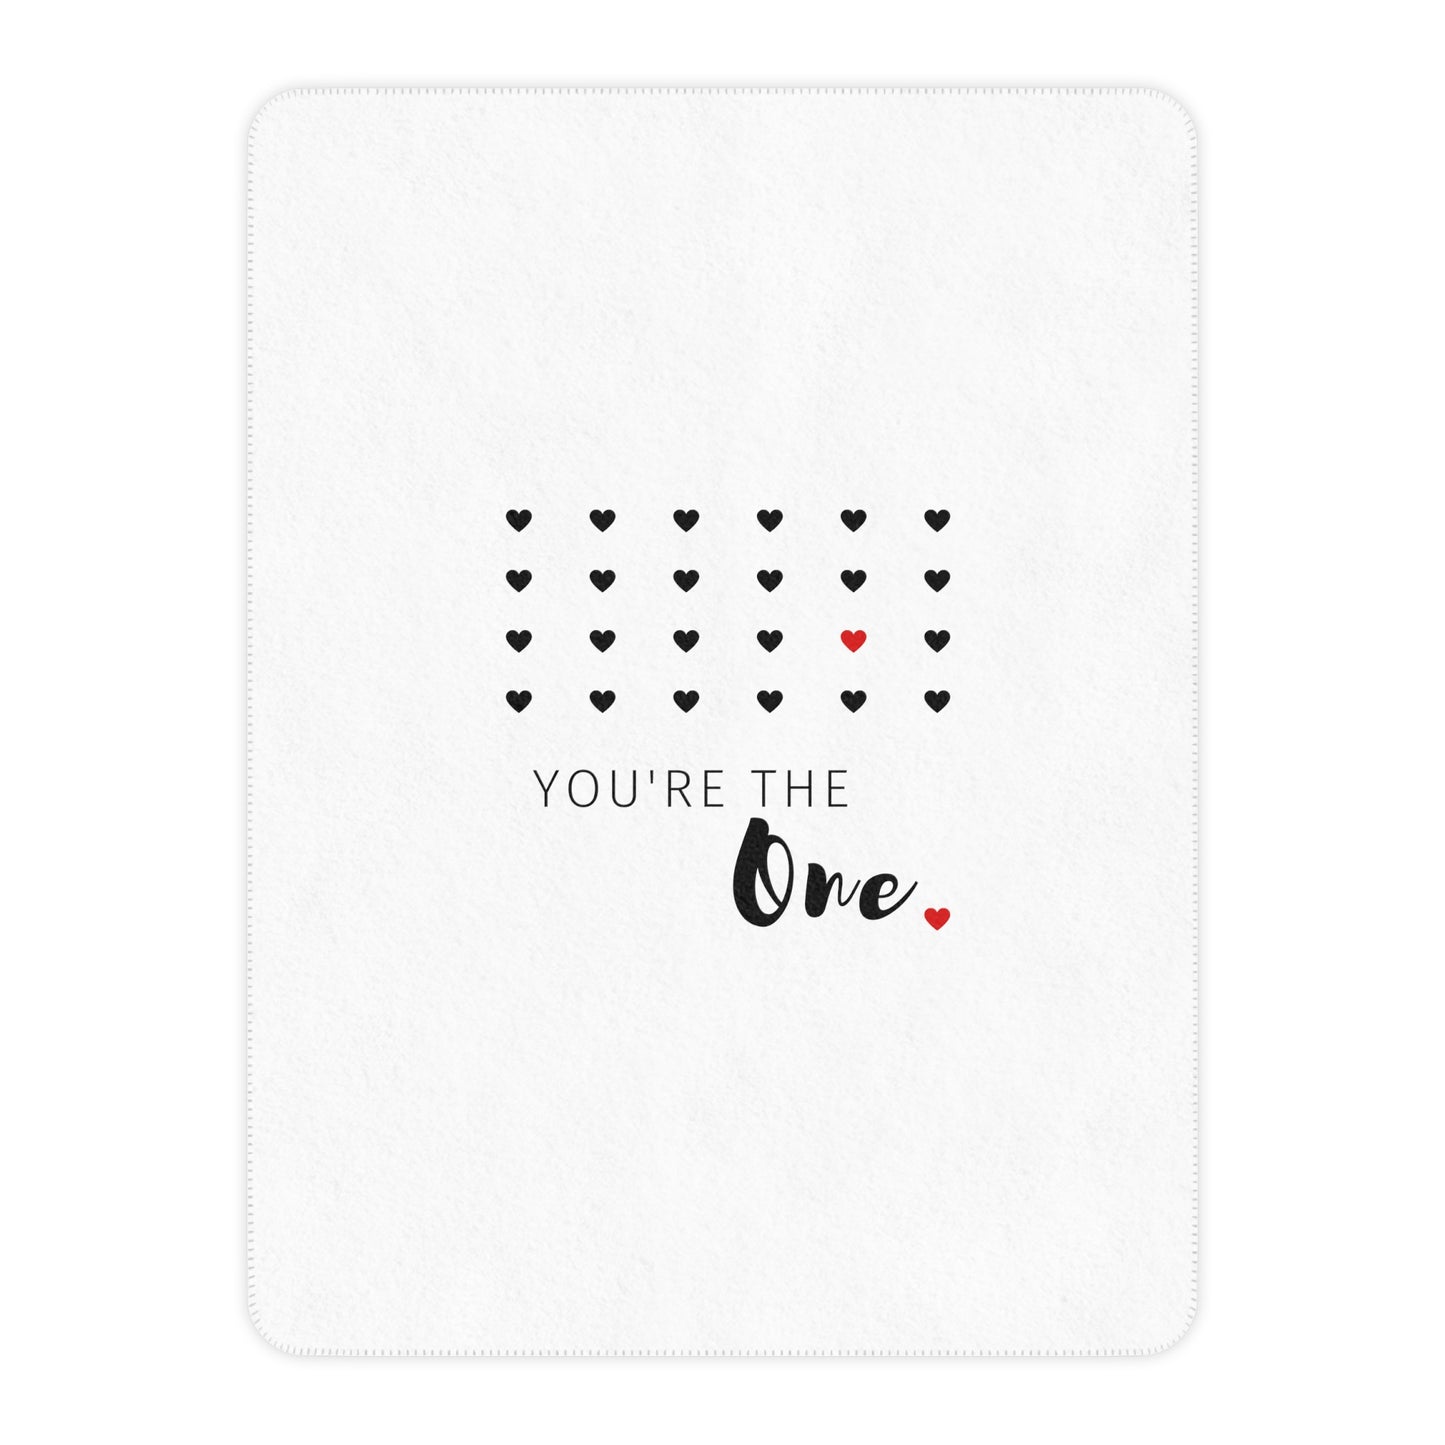 You are the one Printed Tan Sherpa Blanket for Valentines